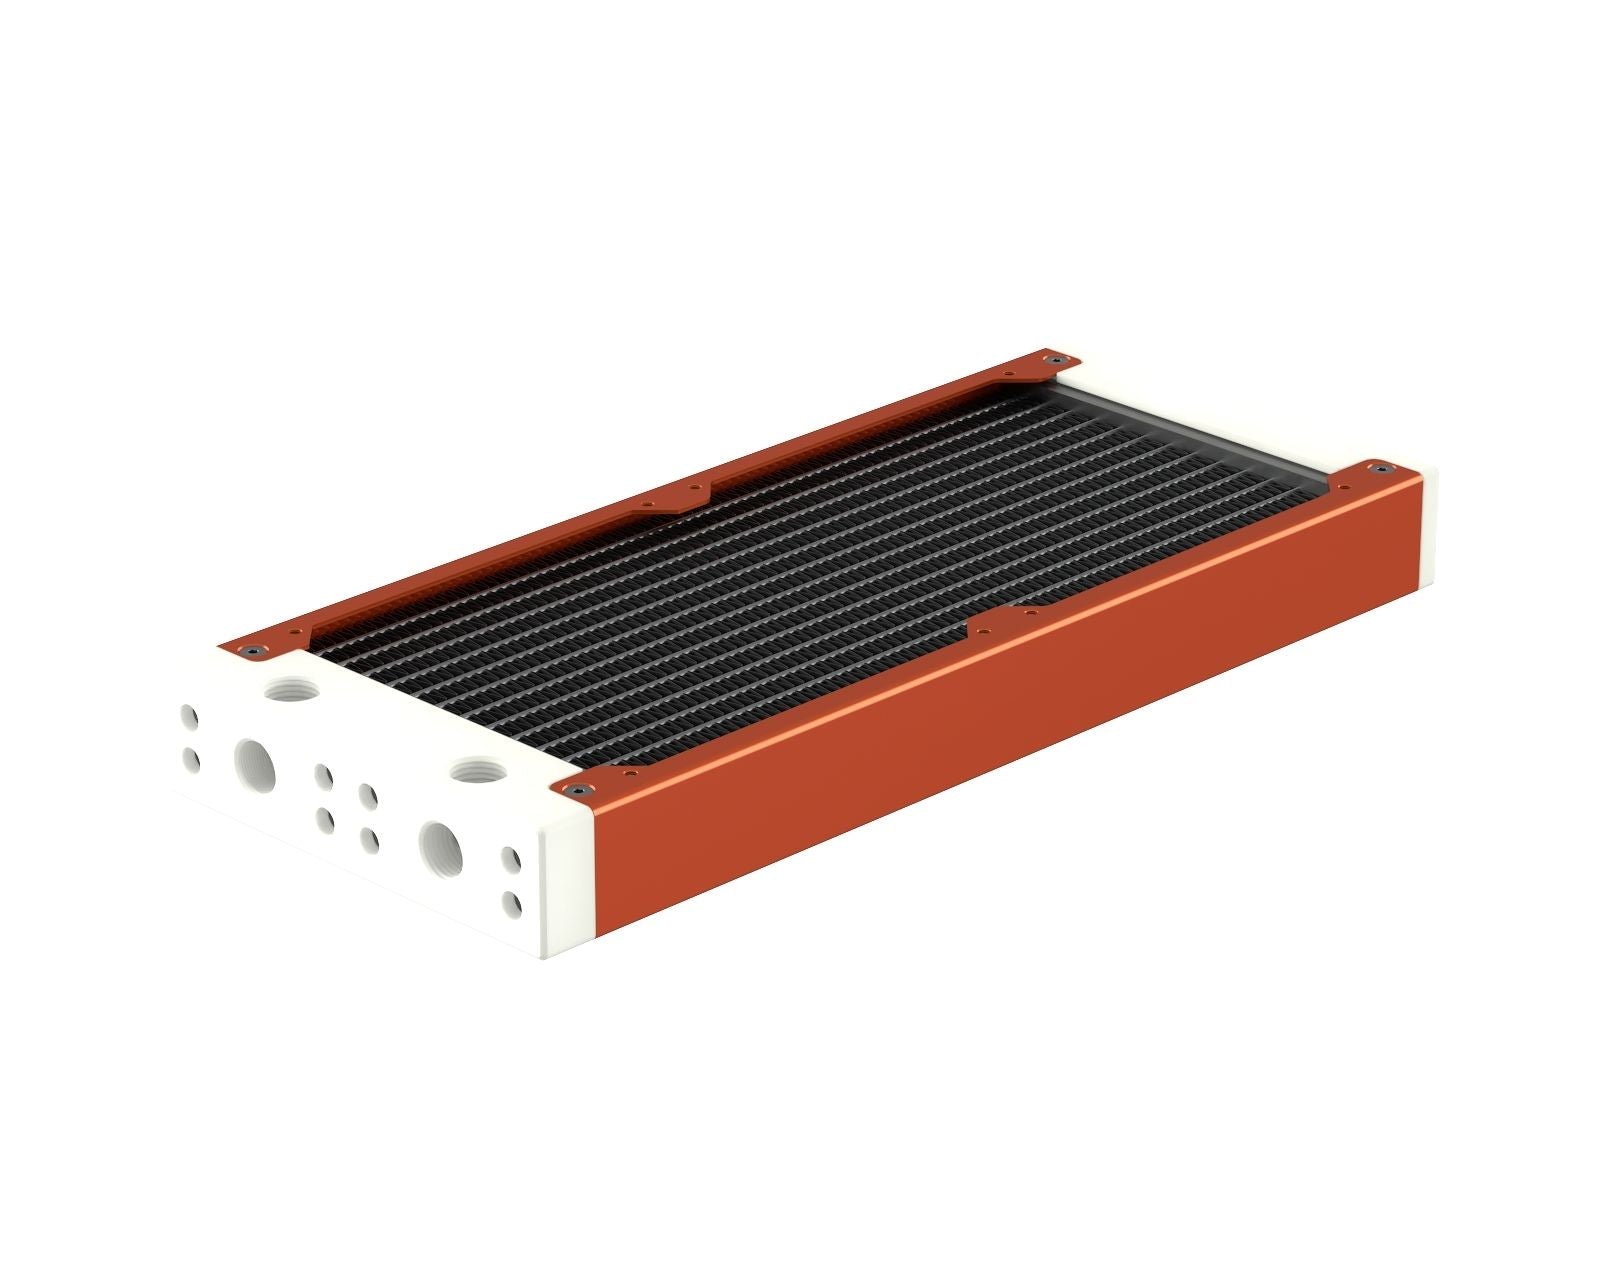 PrimoChill 240SL (30mm) EXIMO Modular Radiator, White POM, 2x120mm, Dual Fan (R-SL-W24) Available in 20+ Colors, Assembled in USA and Custom Watercooling Loop Ready - Candy Copper